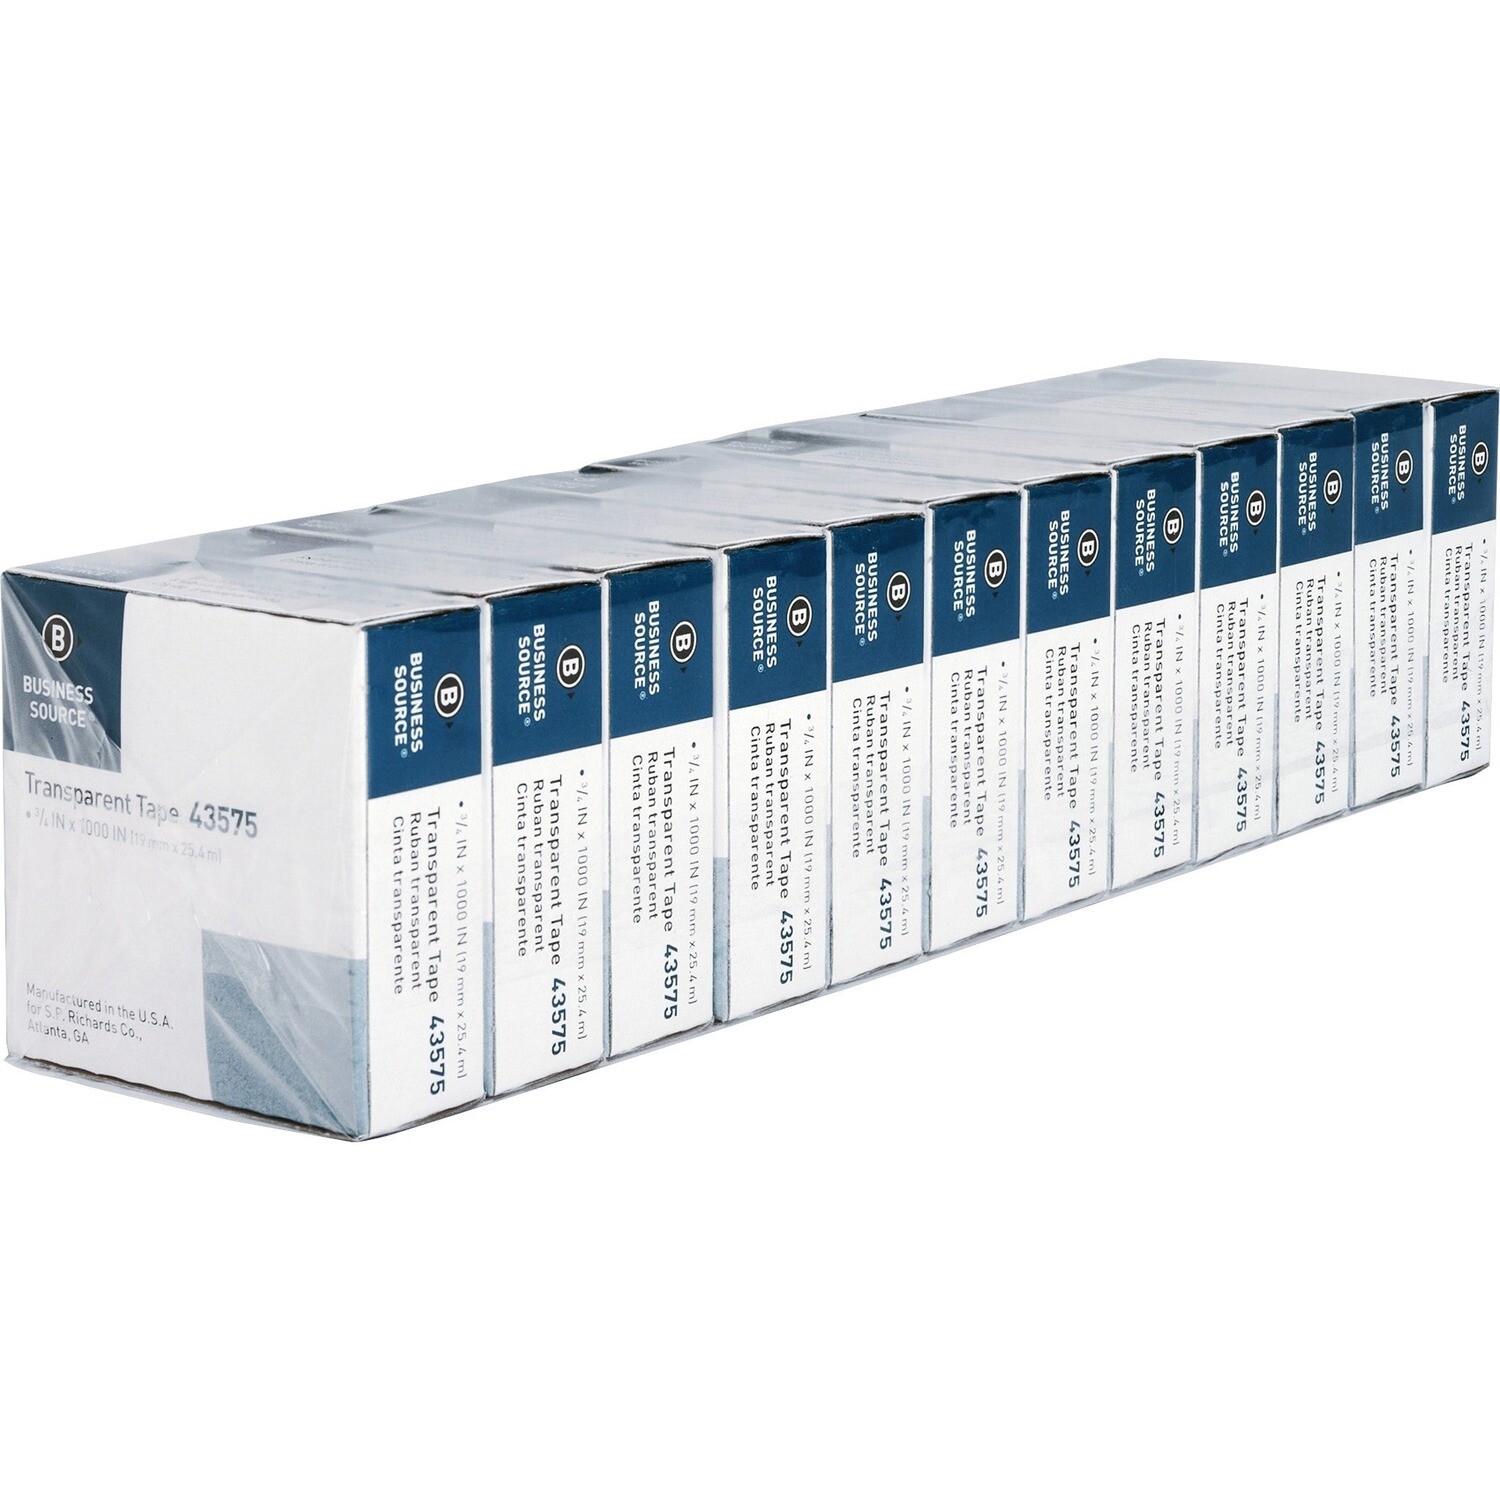 Tape, Transparent 12 Pack, 3/4" x 1000", Business Source